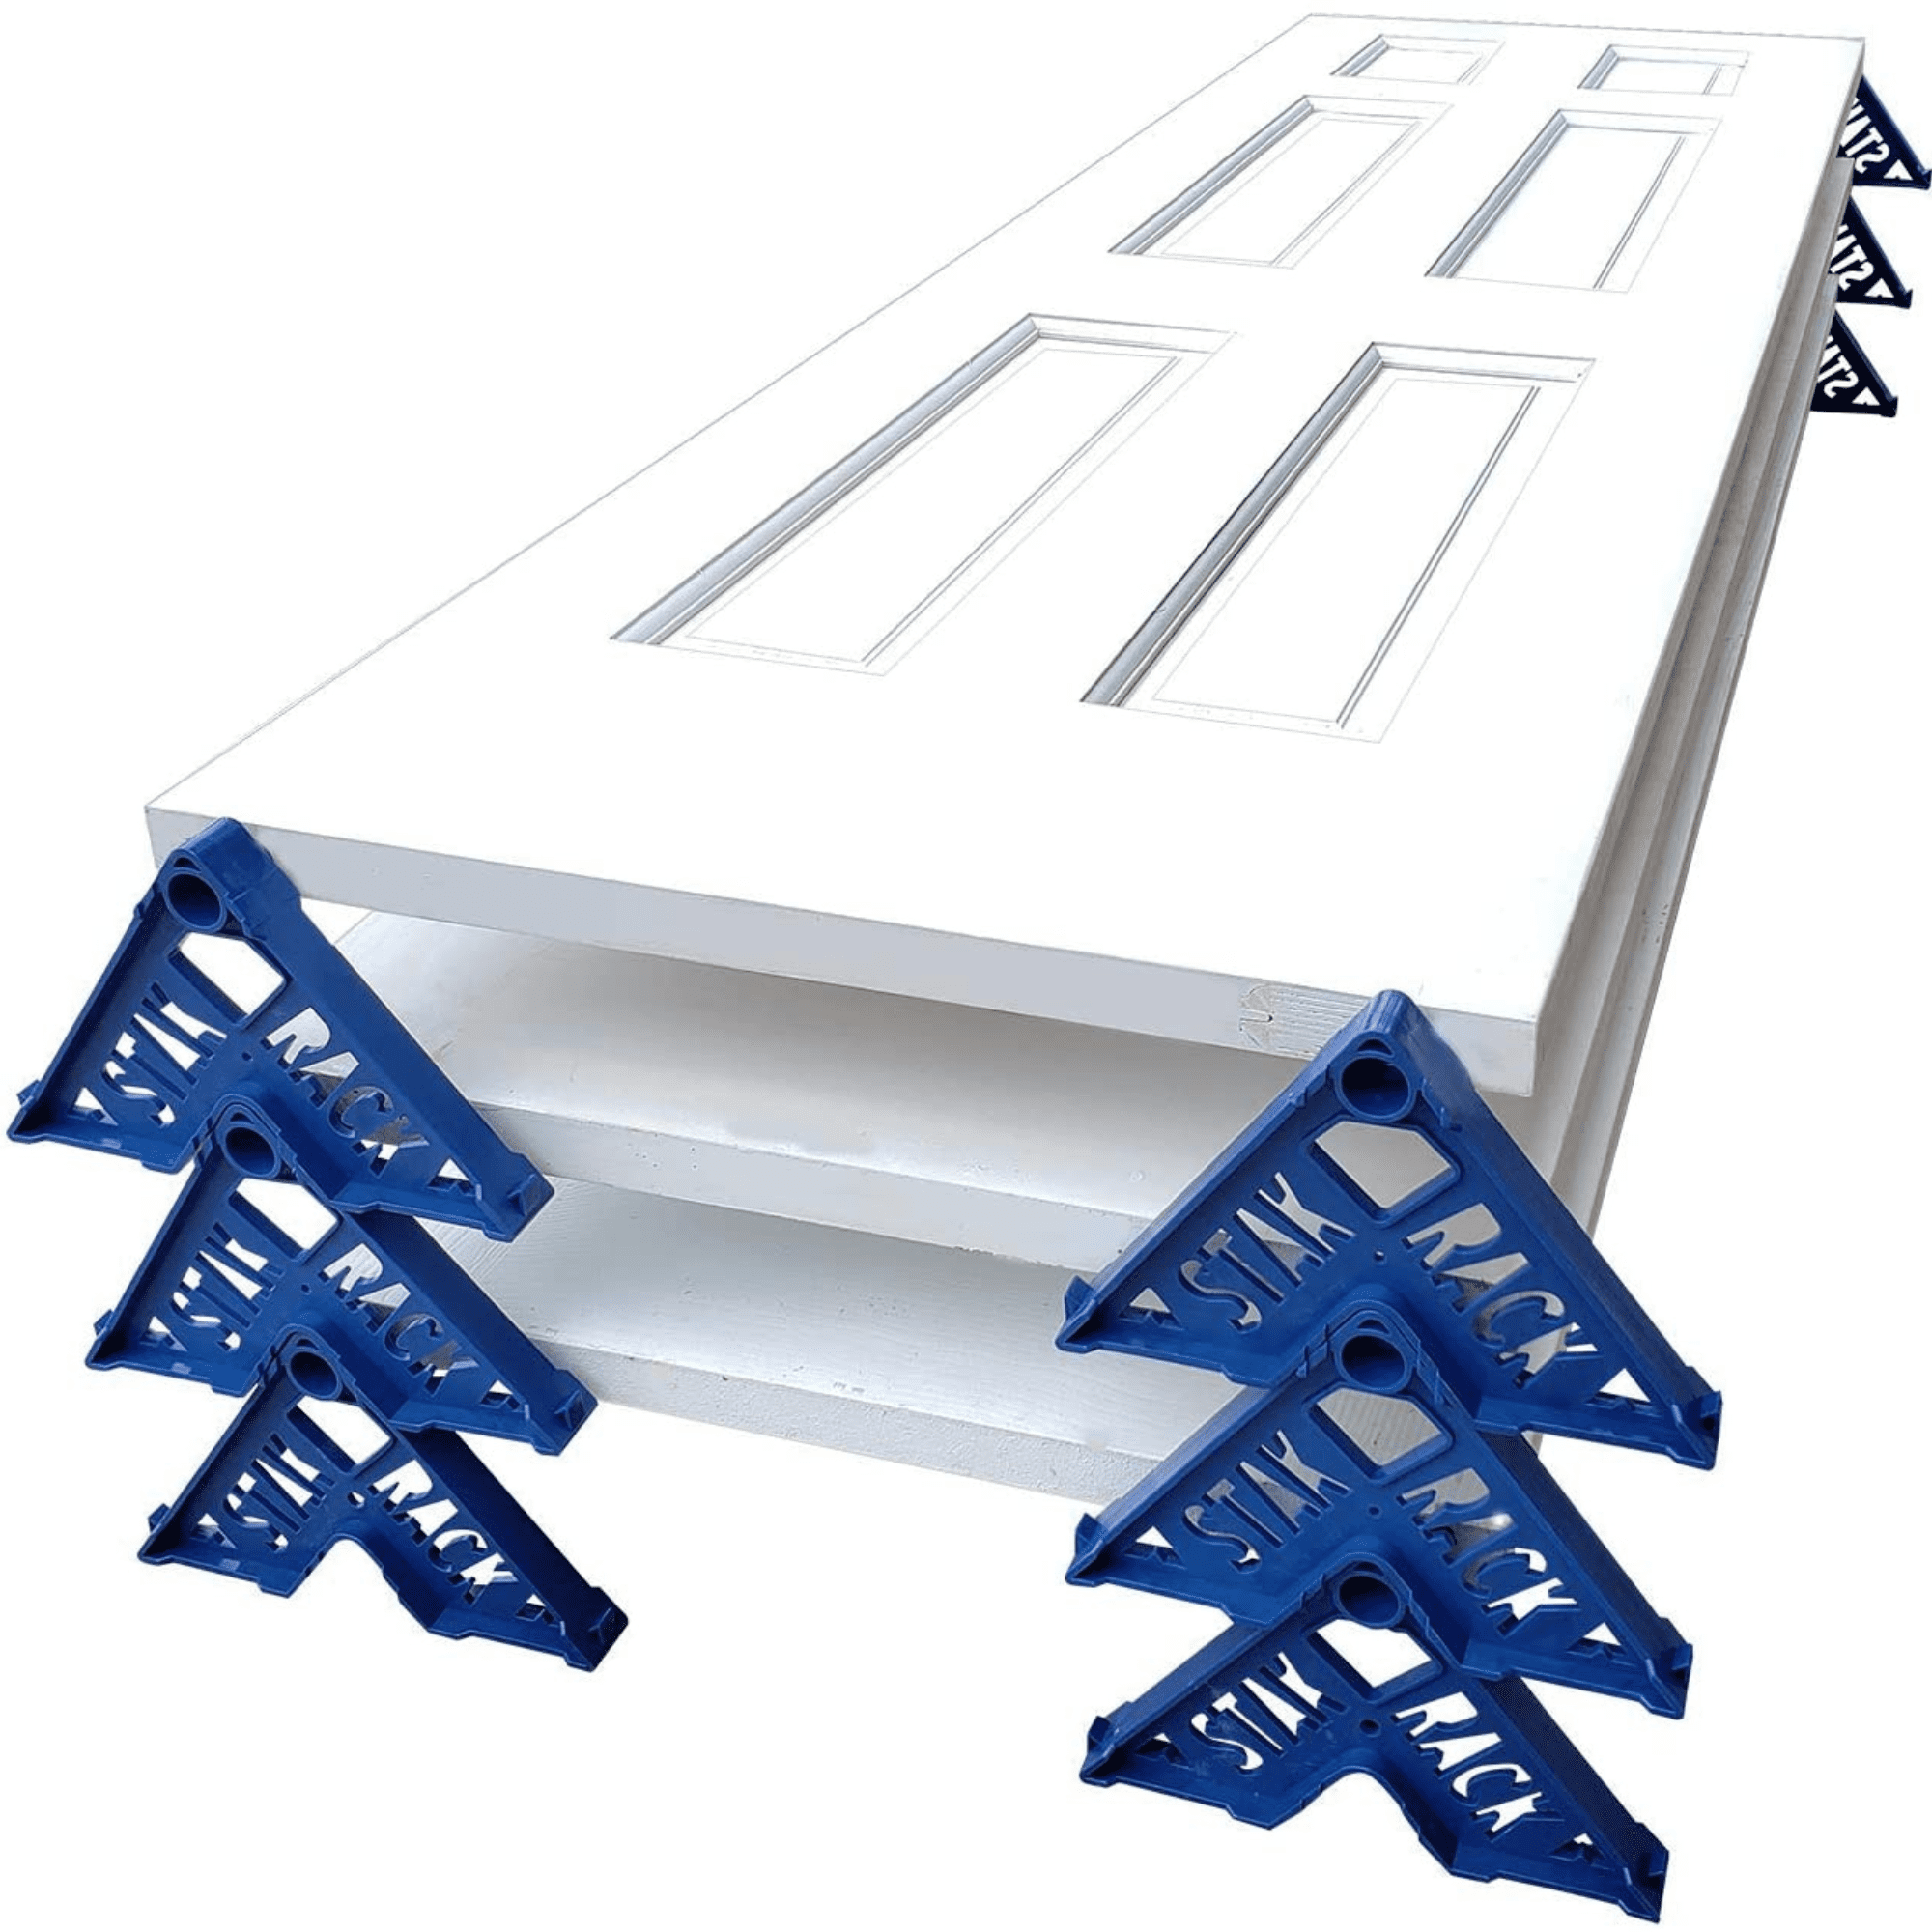 Stak Rack 12 Unit Contractor Pack Drying Rack Kit